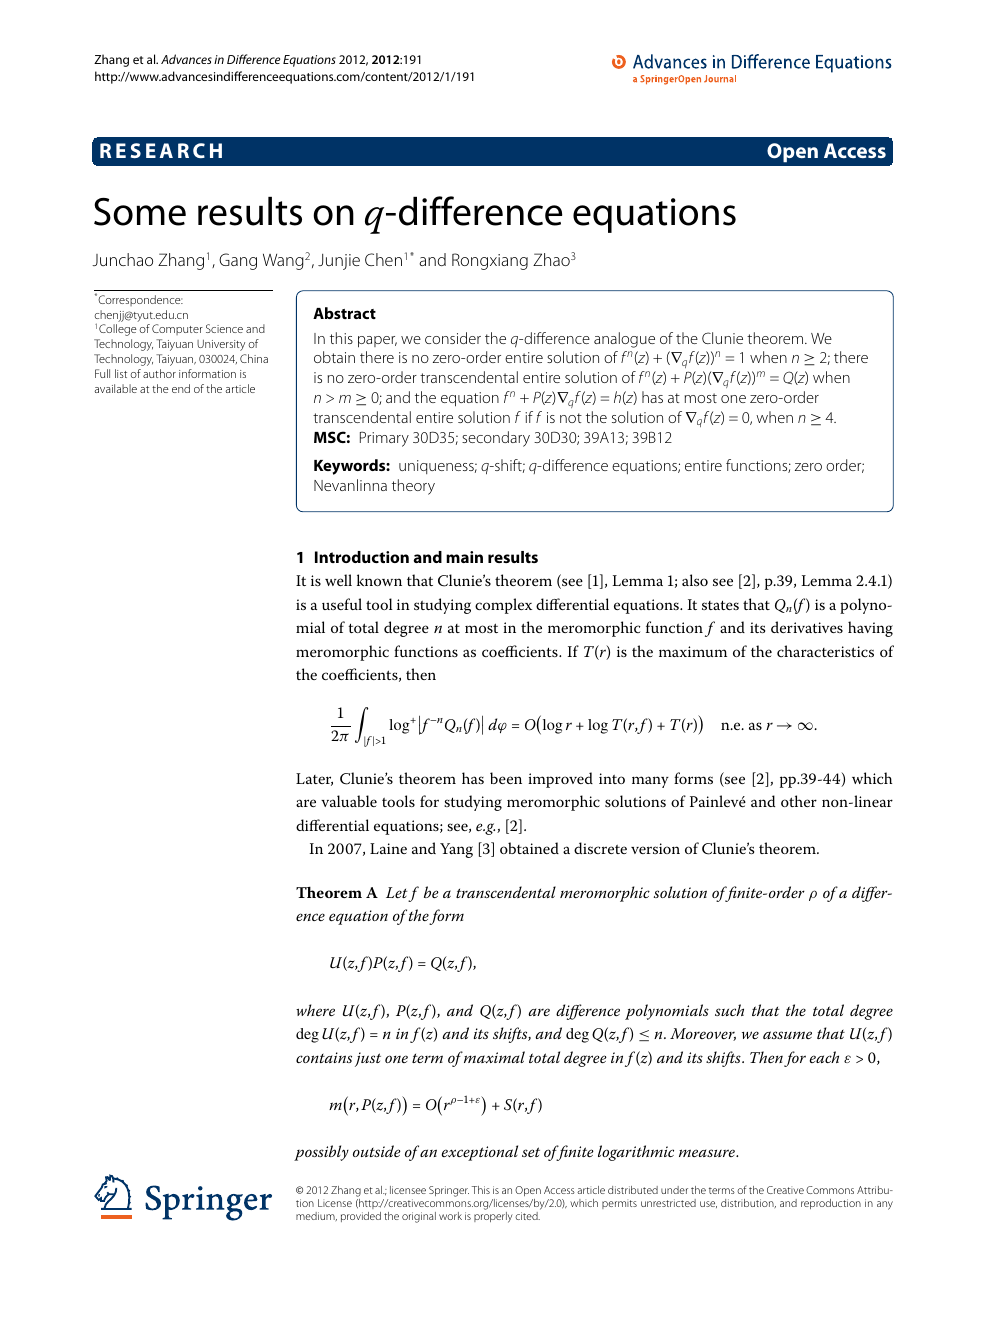 Some Results On Q Difference Equations Topic Of Research Paper In Mathematics Download Scholarly Article Pdf And Read For Free On Cyberleninka Open Science Hub